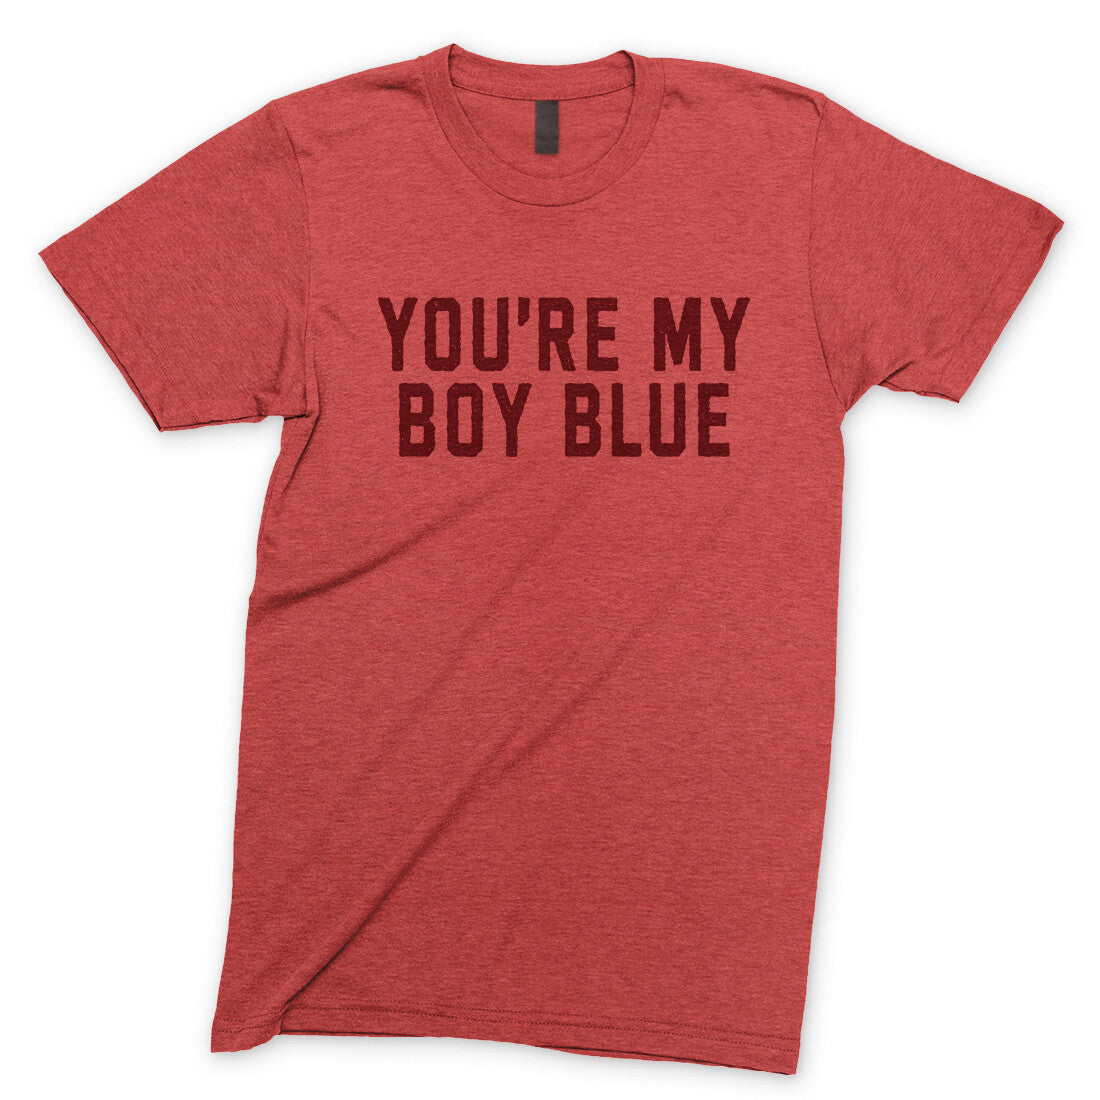 You're my Boy Blue in Heather Red Color